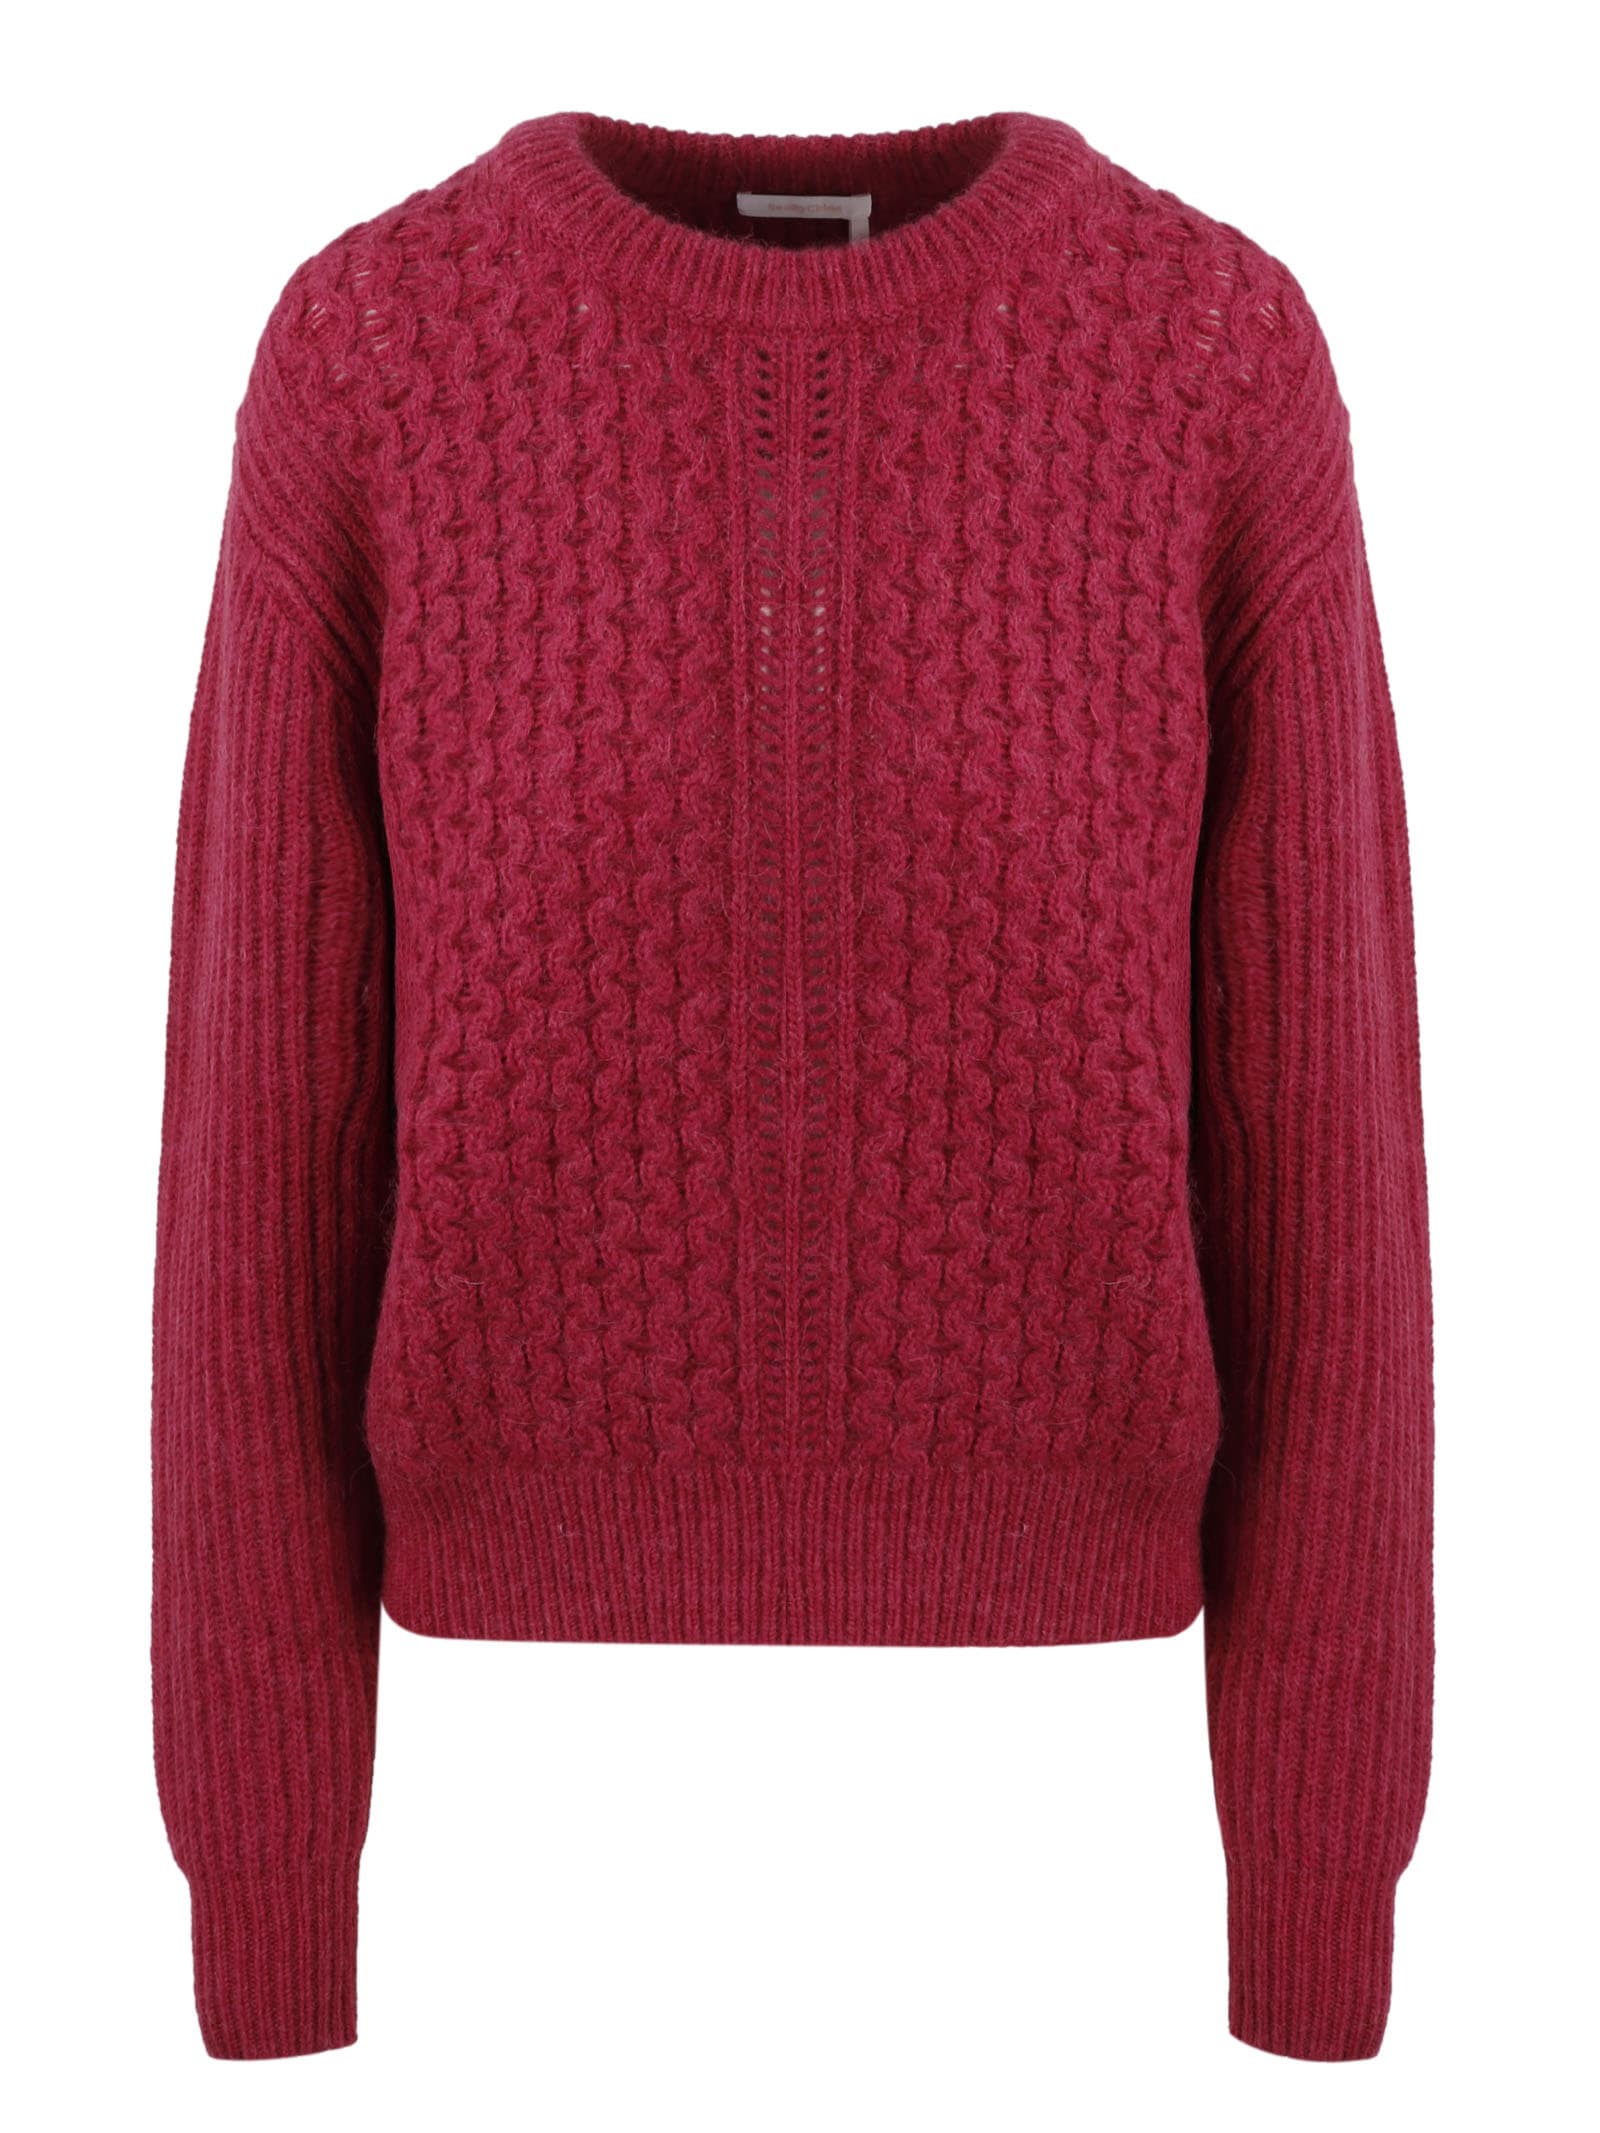 See by Chloé Roundneck Sweater